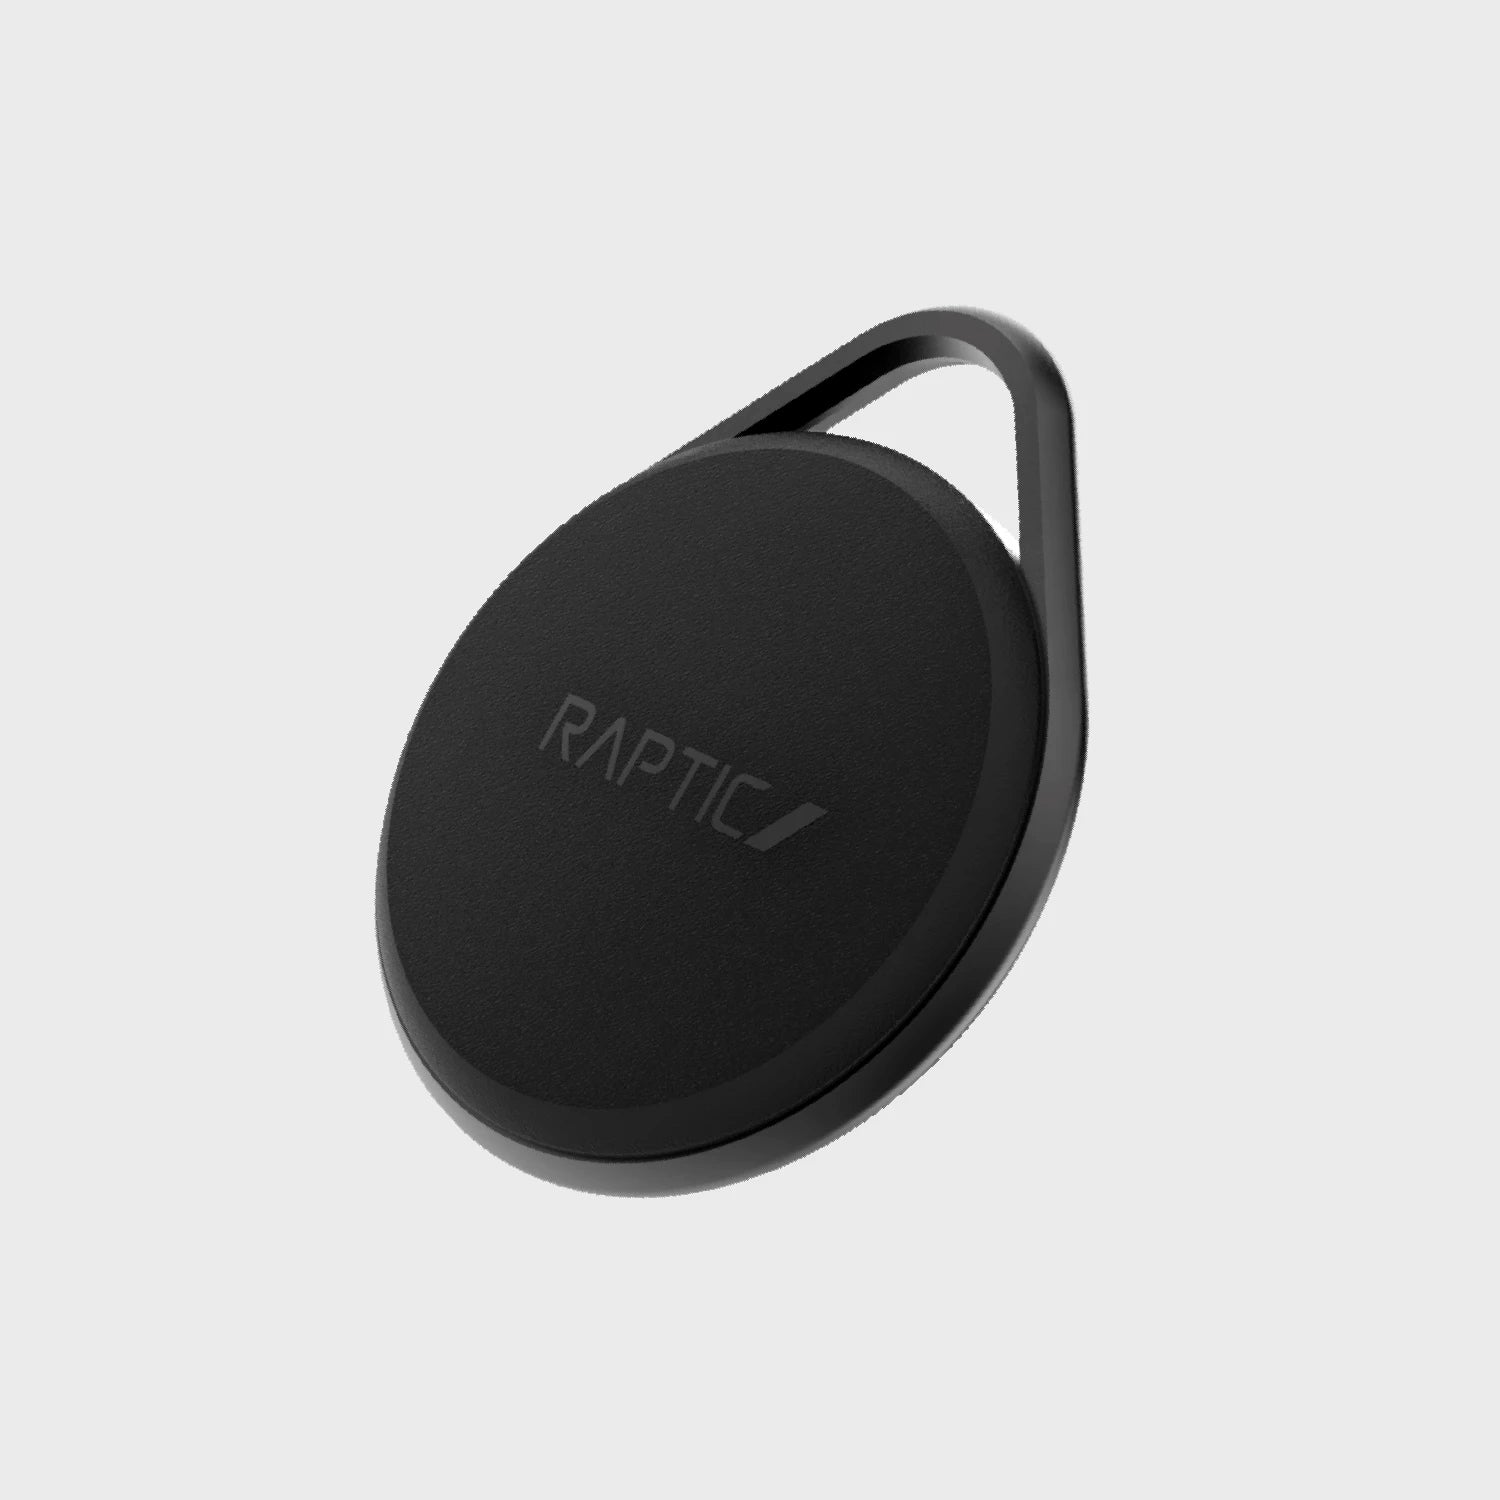 A black Apple AirTag Case - LINK with the word Raptic on it.